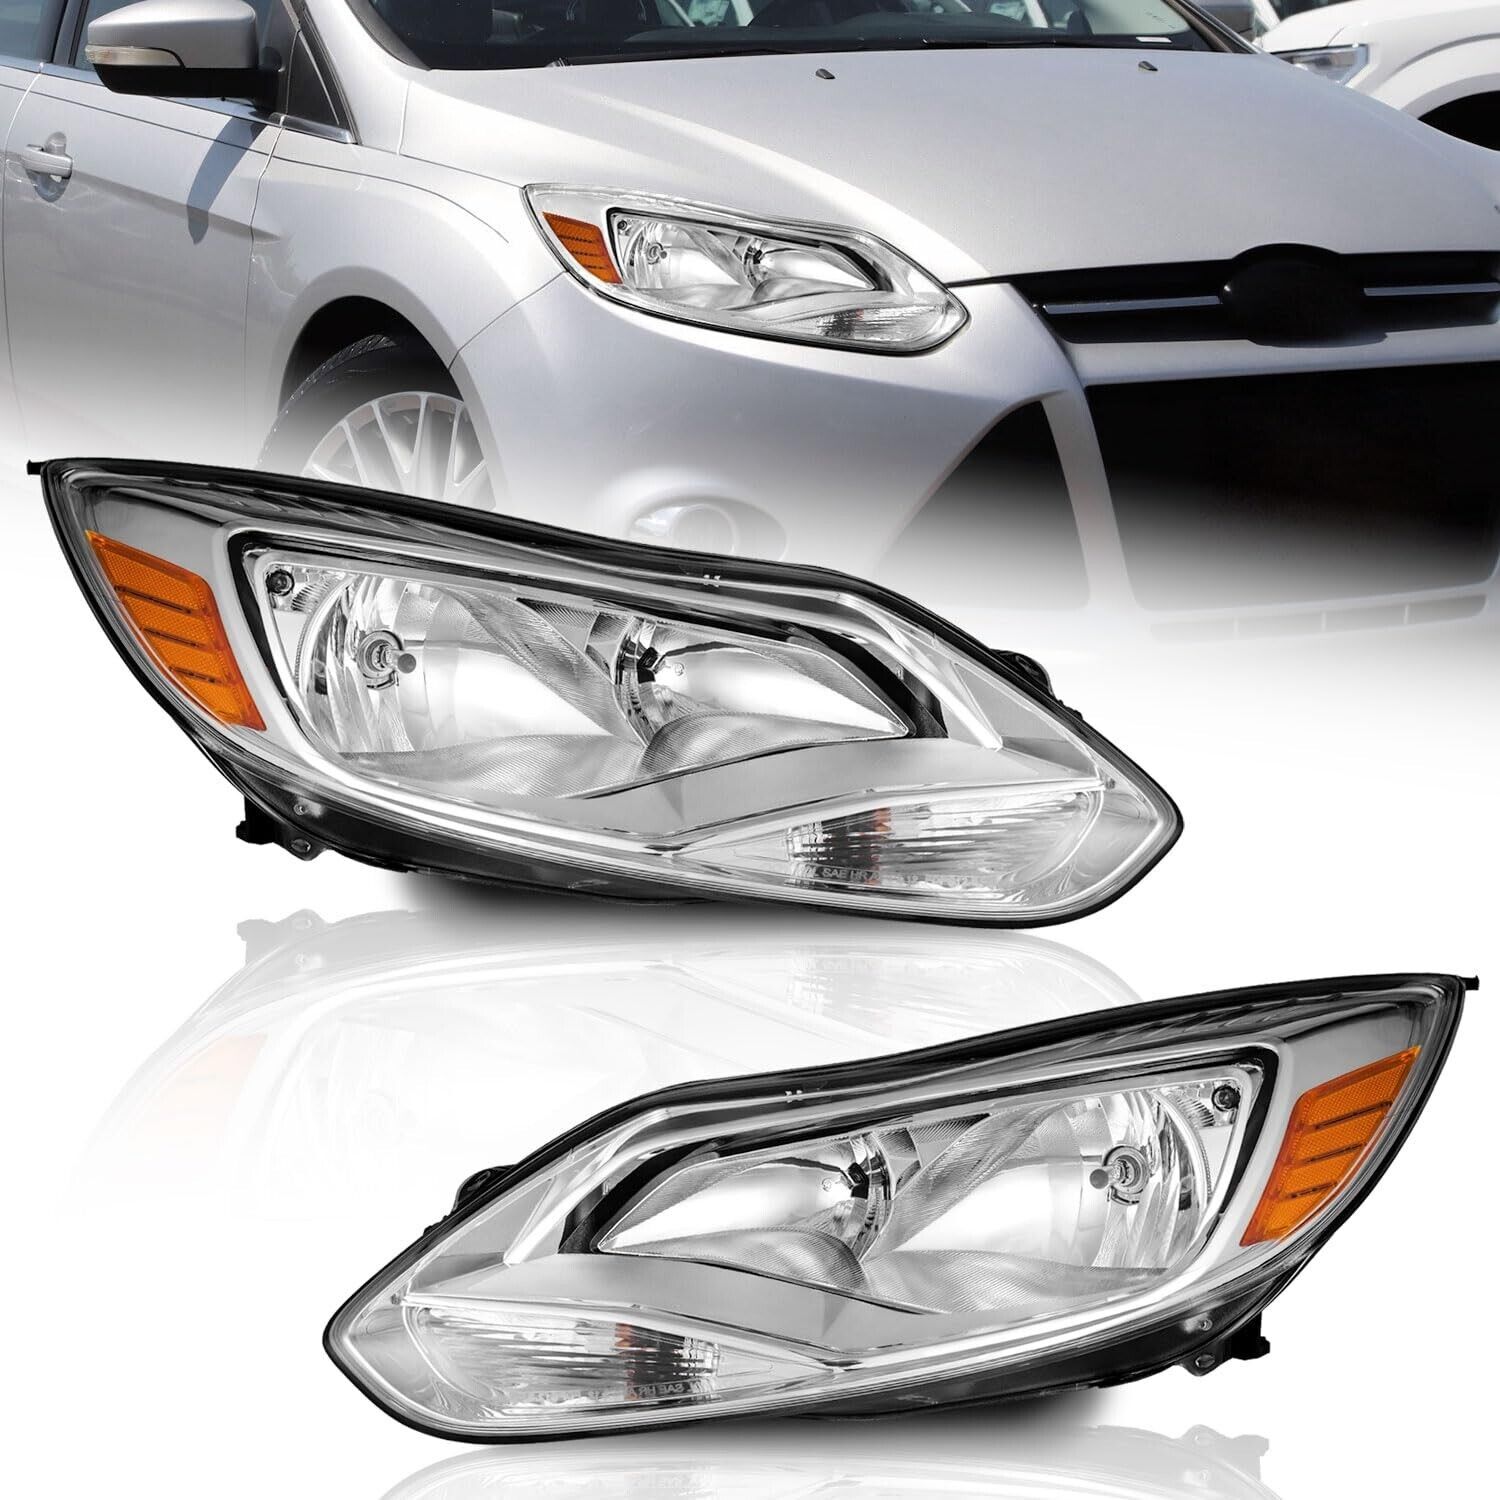 WEELMOTO Headlights Assembly For 2012-2014 Ford Focus Pair Headlamp Left+Right